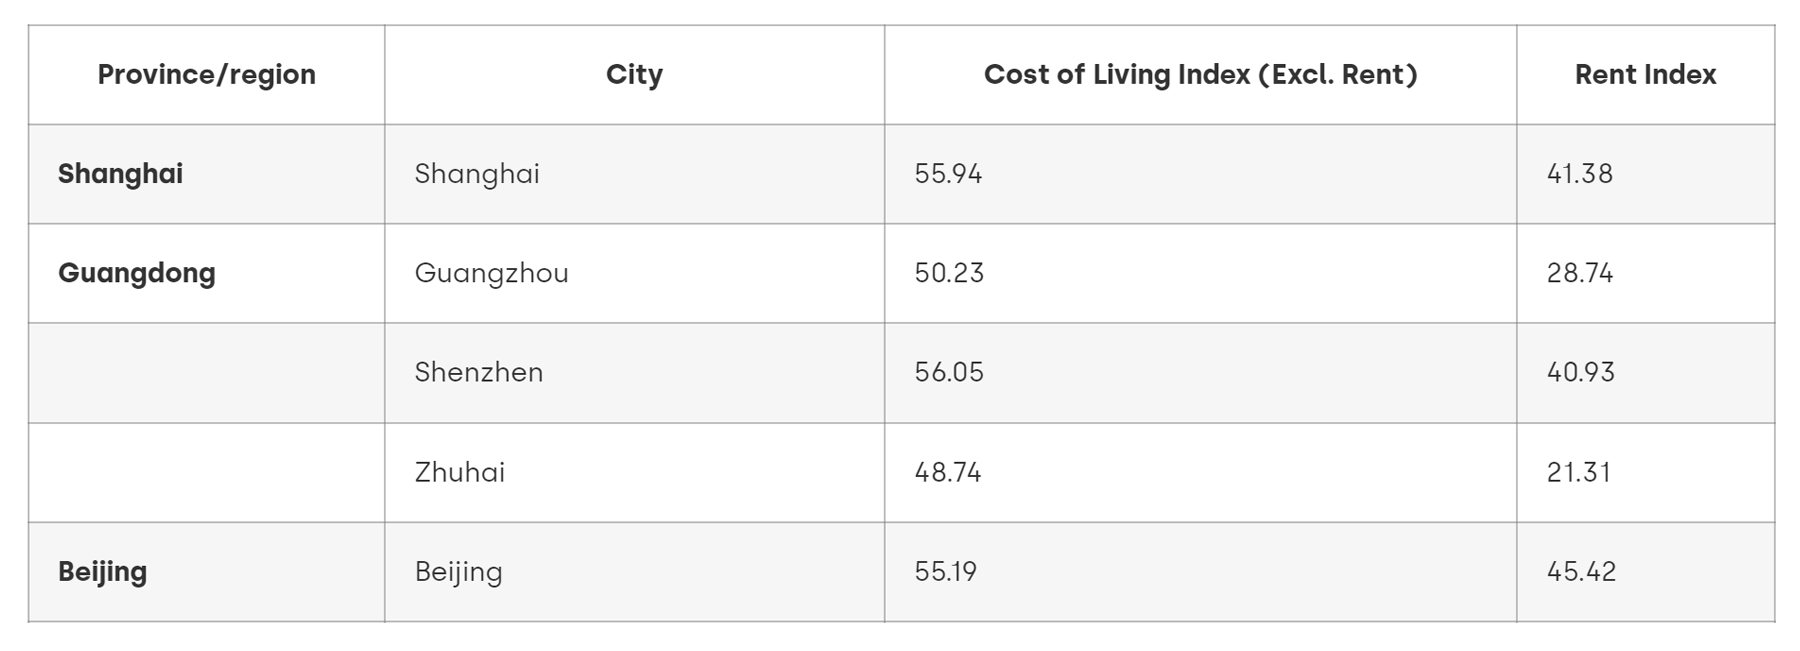 Cost of living in Chinese cities